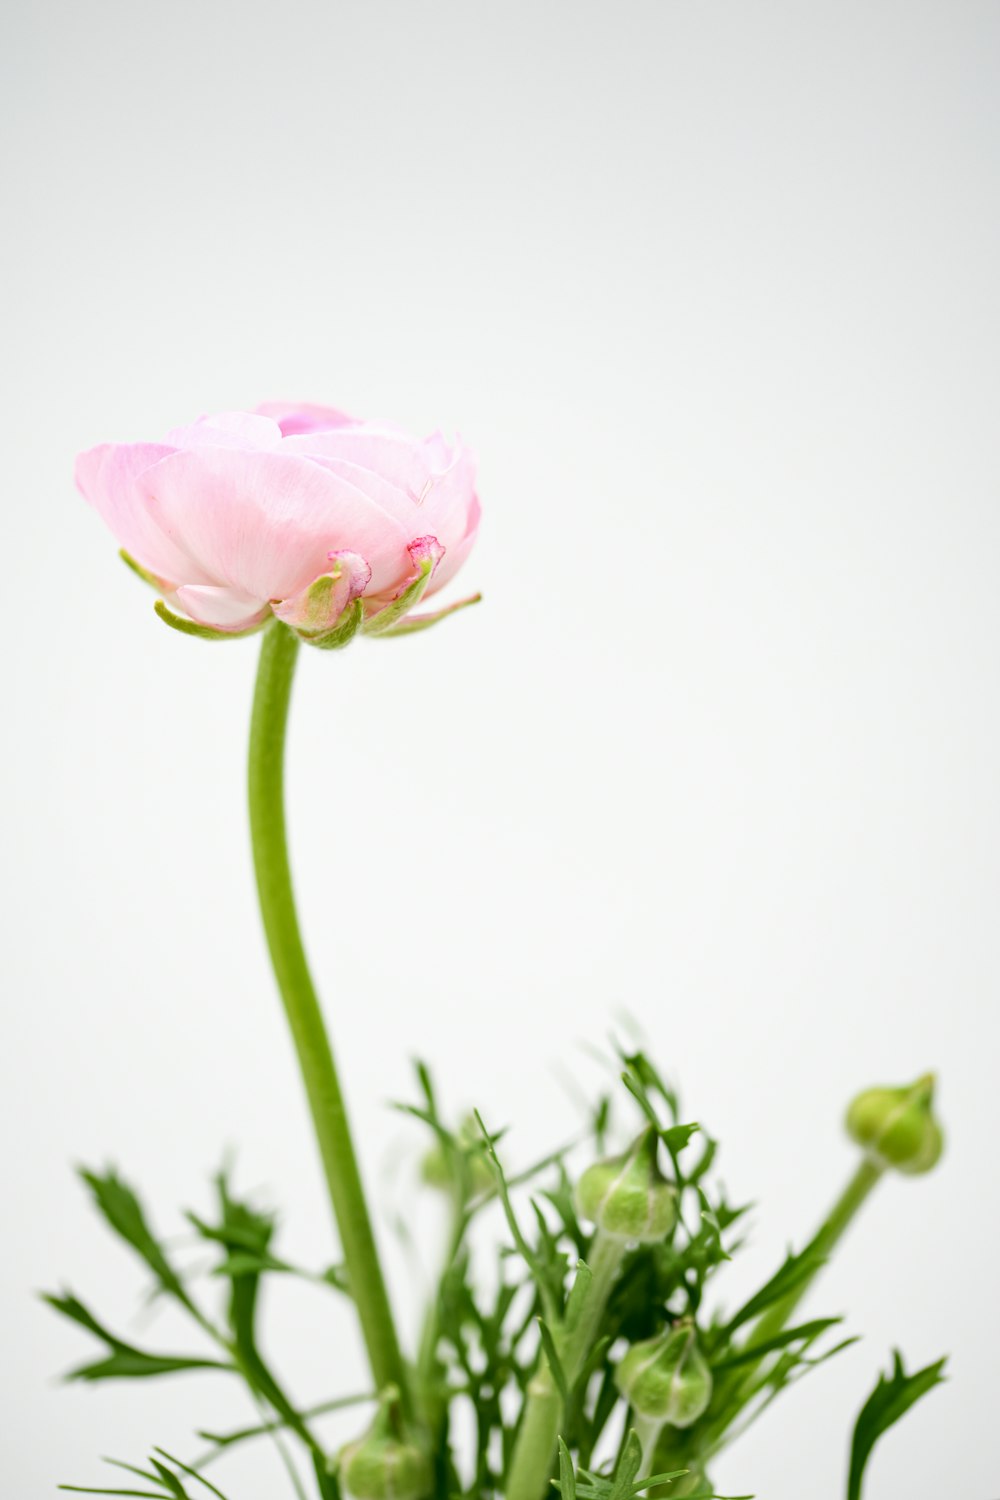 a pink flower with green stems in a vase